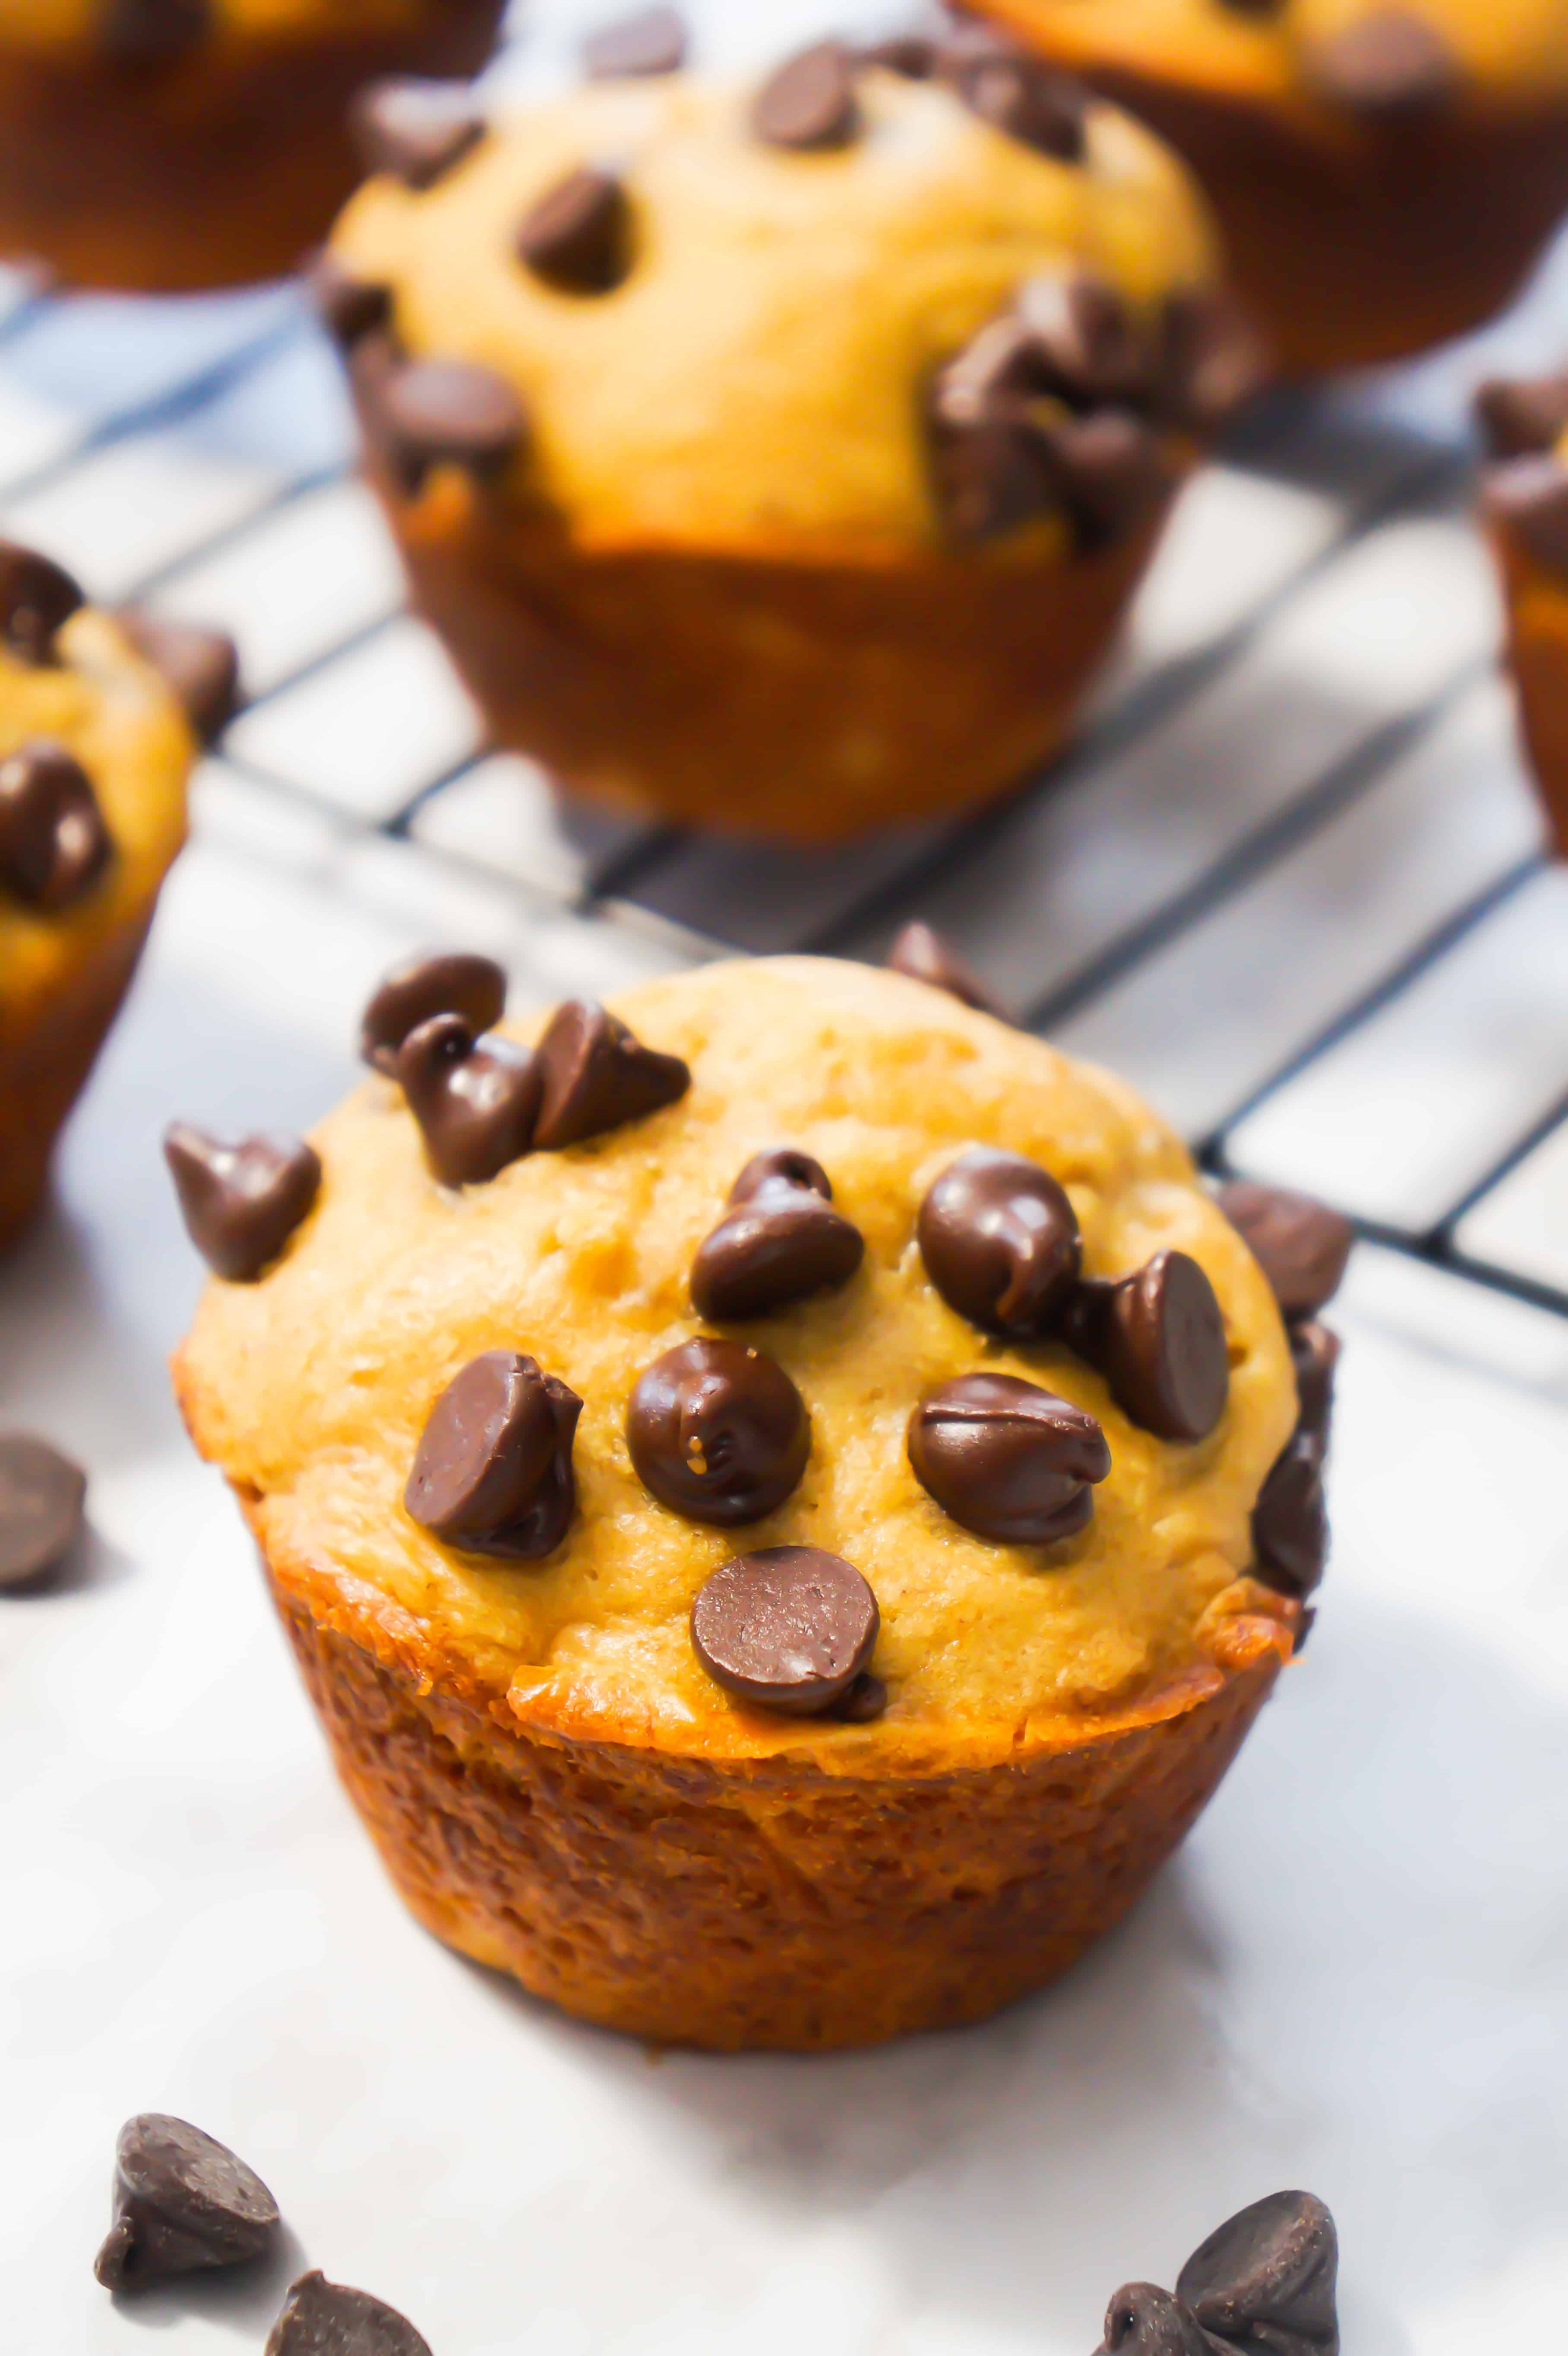 Peanut Banana Muffin with chocolate chips.